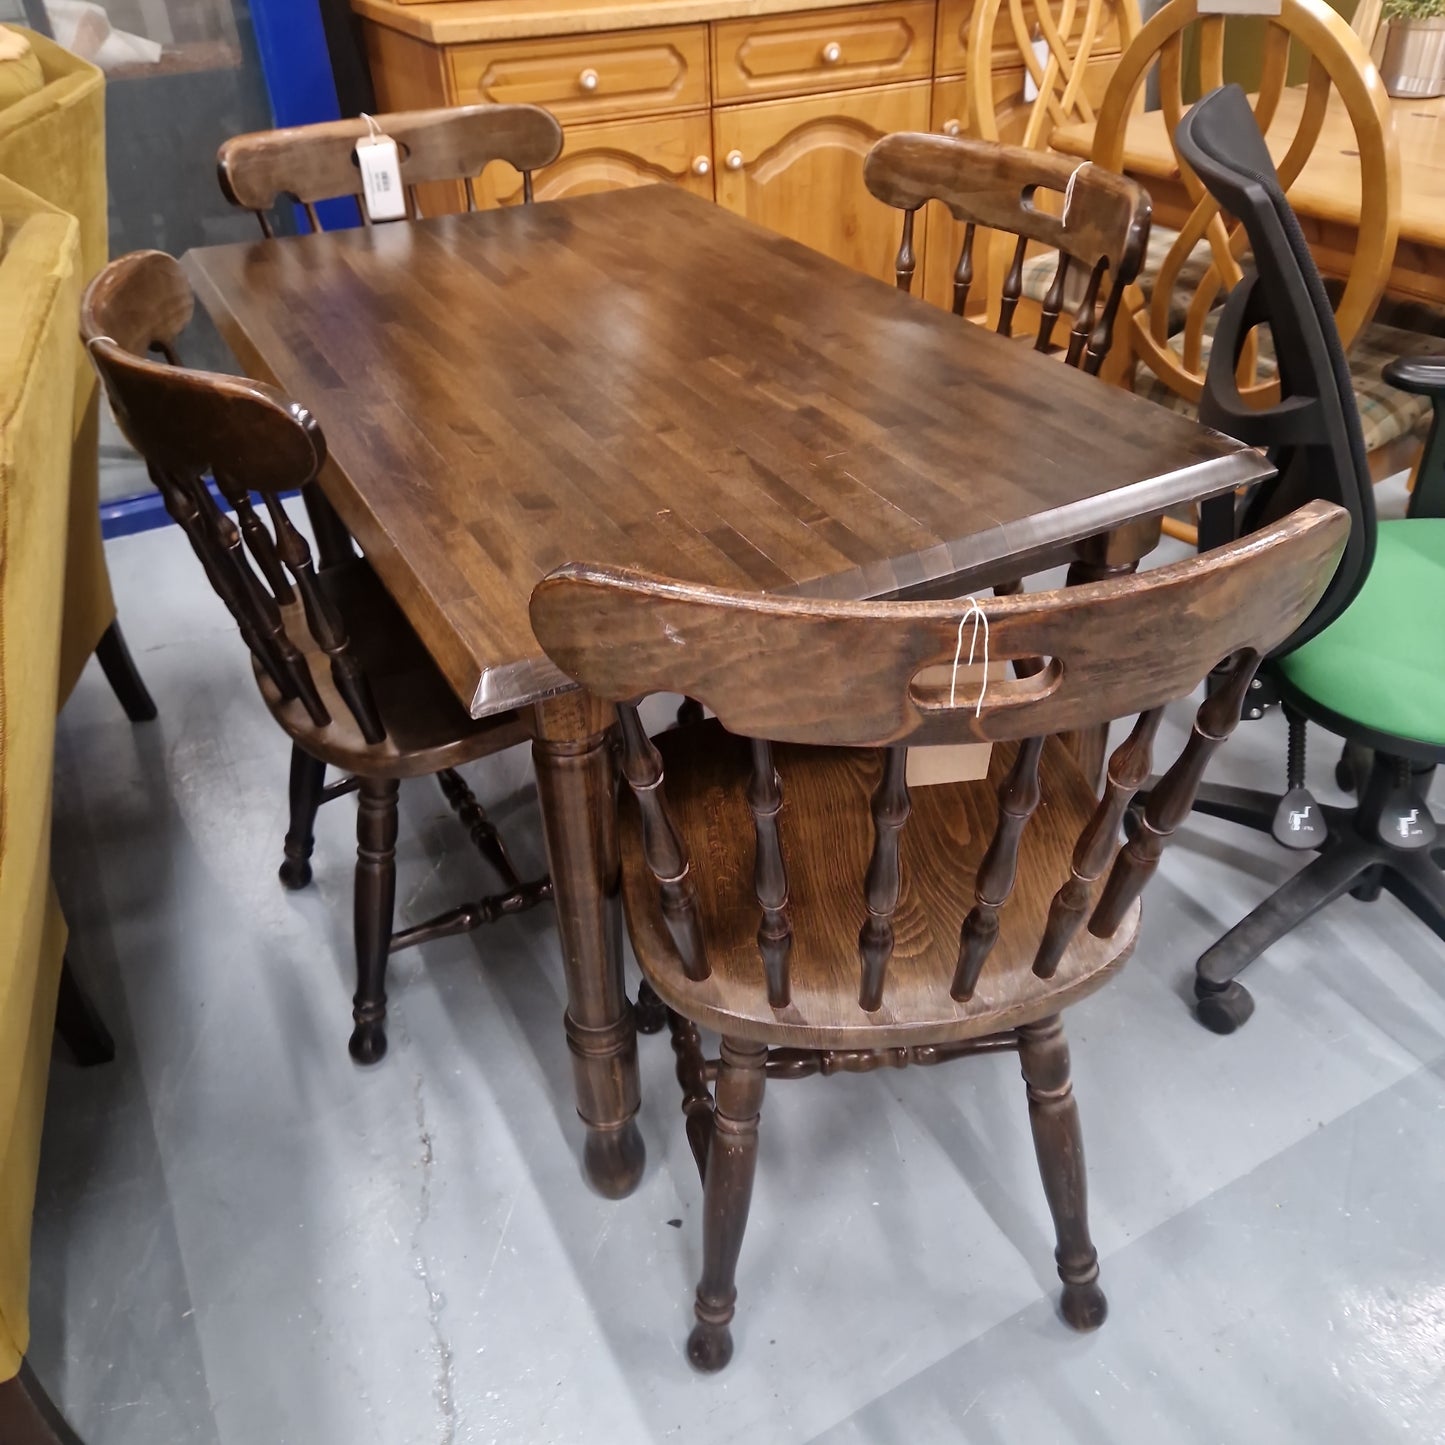 Hardwood 4ft darkwood stained dining table cw 4 matching chairs